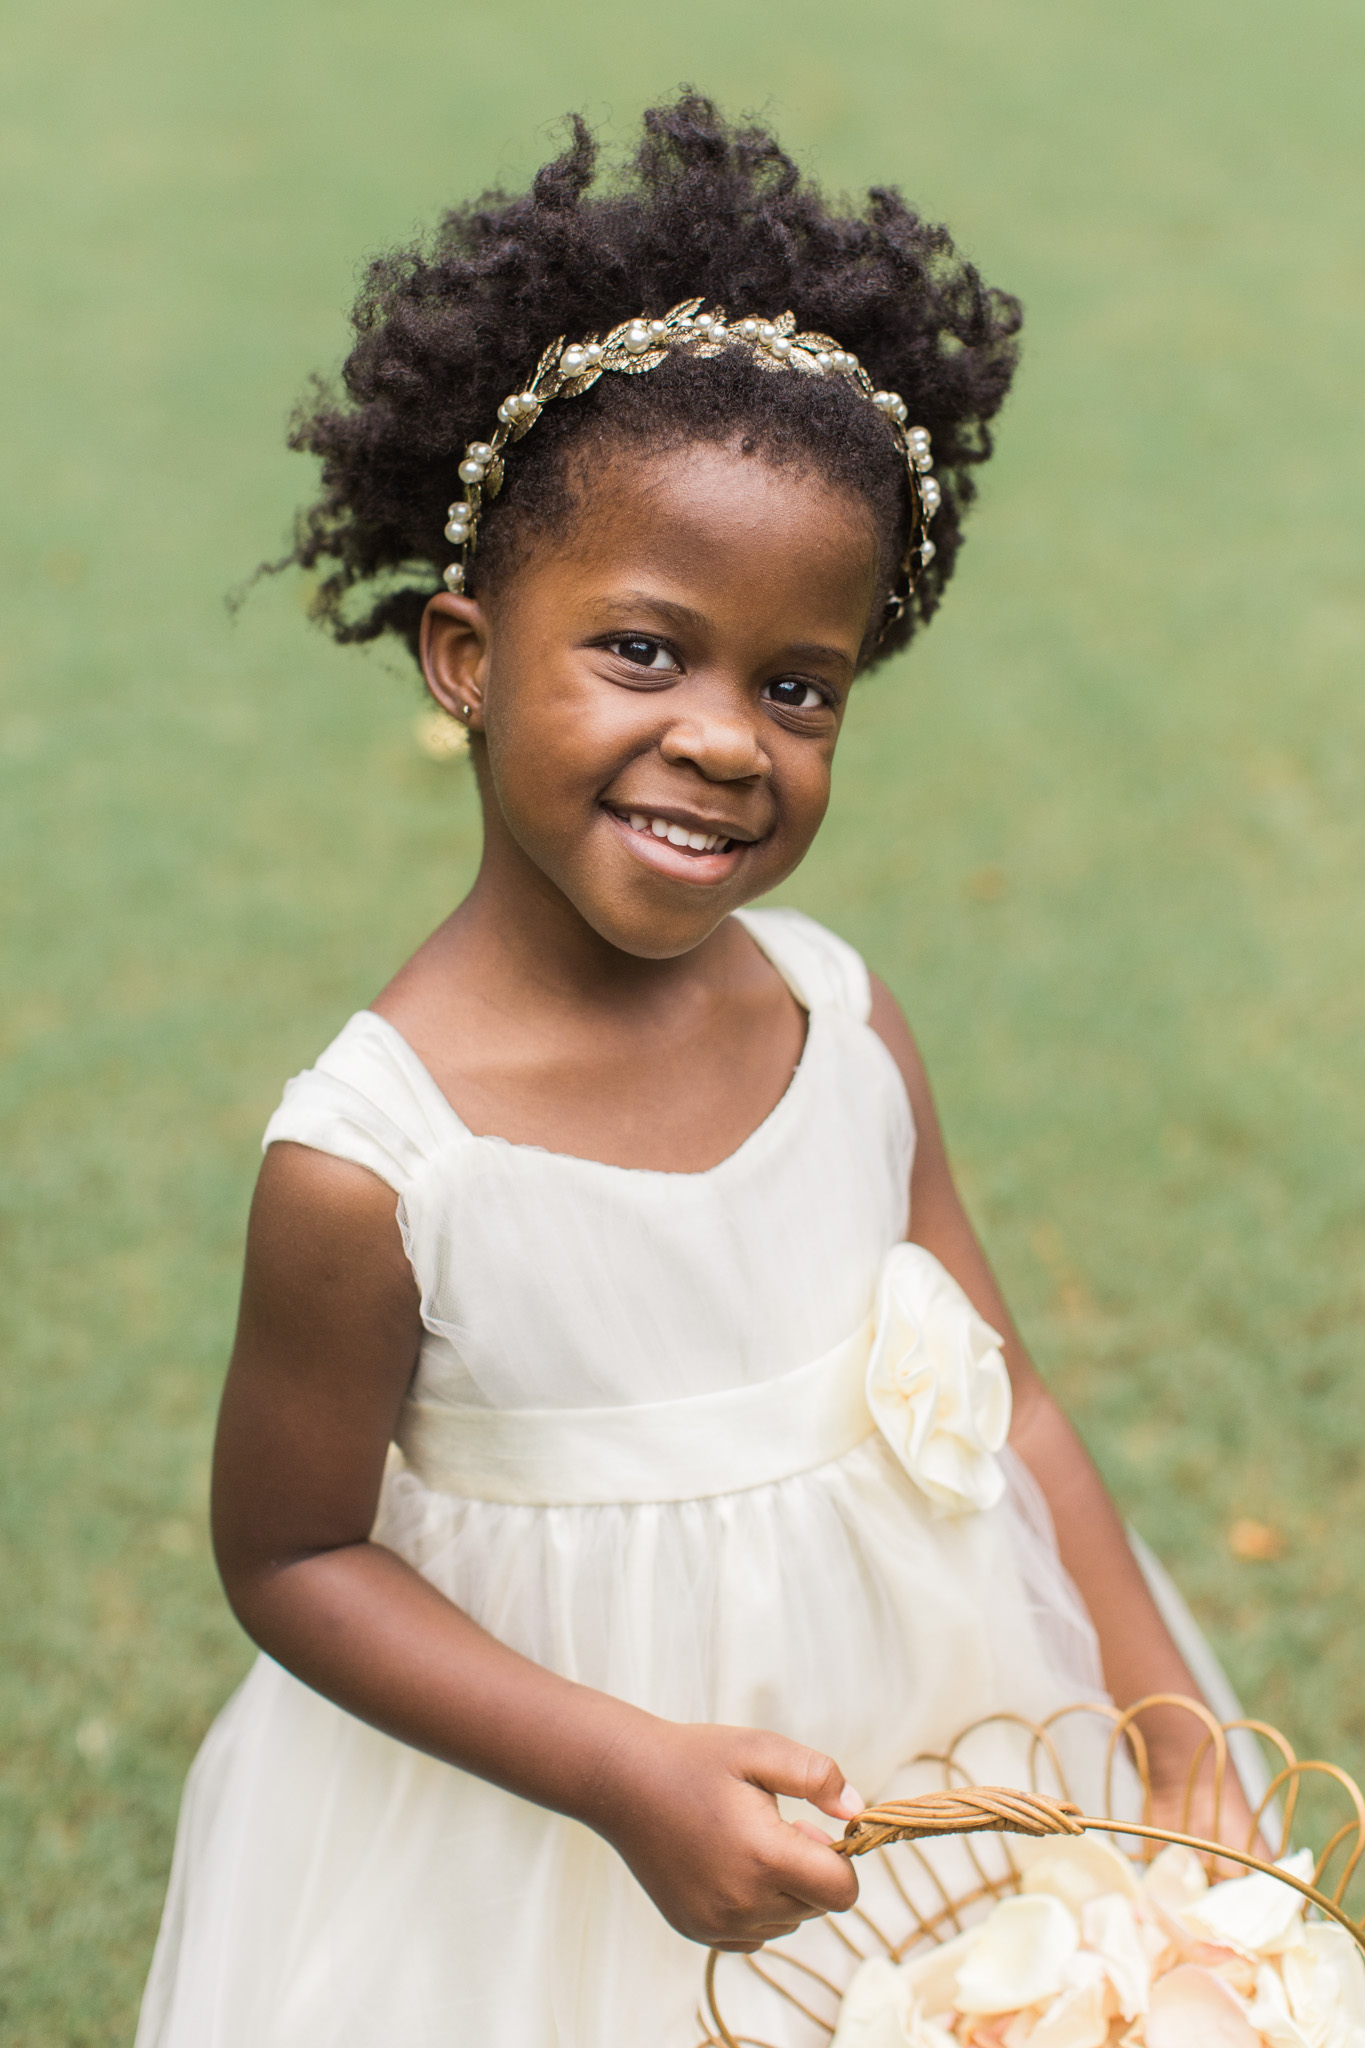 Flower girl dress and hairstyle captured by Swan House photographer Rebecca Cerasani